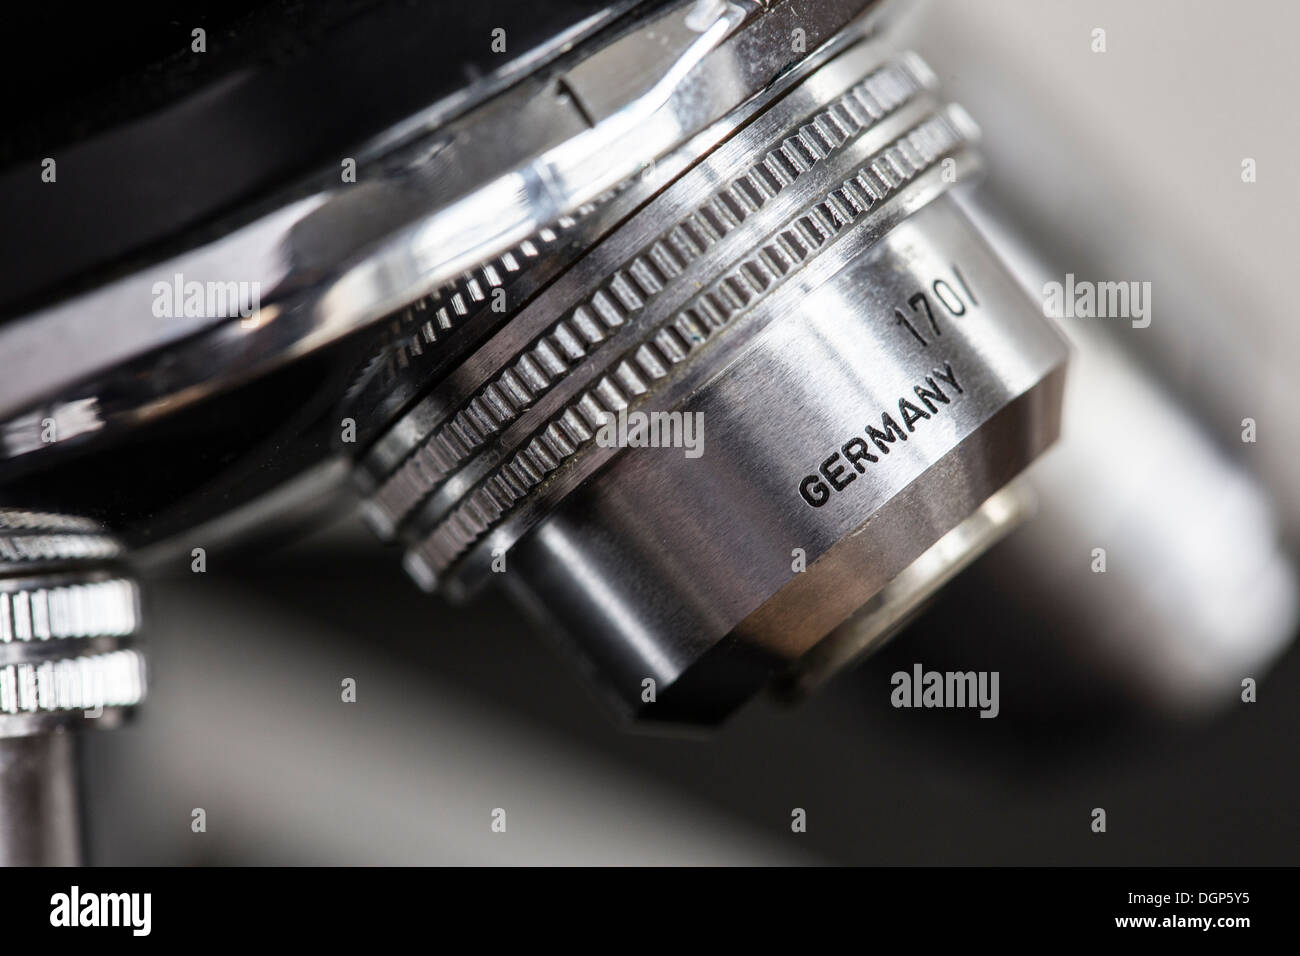 Seal of quality Made in Germany at a microscope Stock Photo